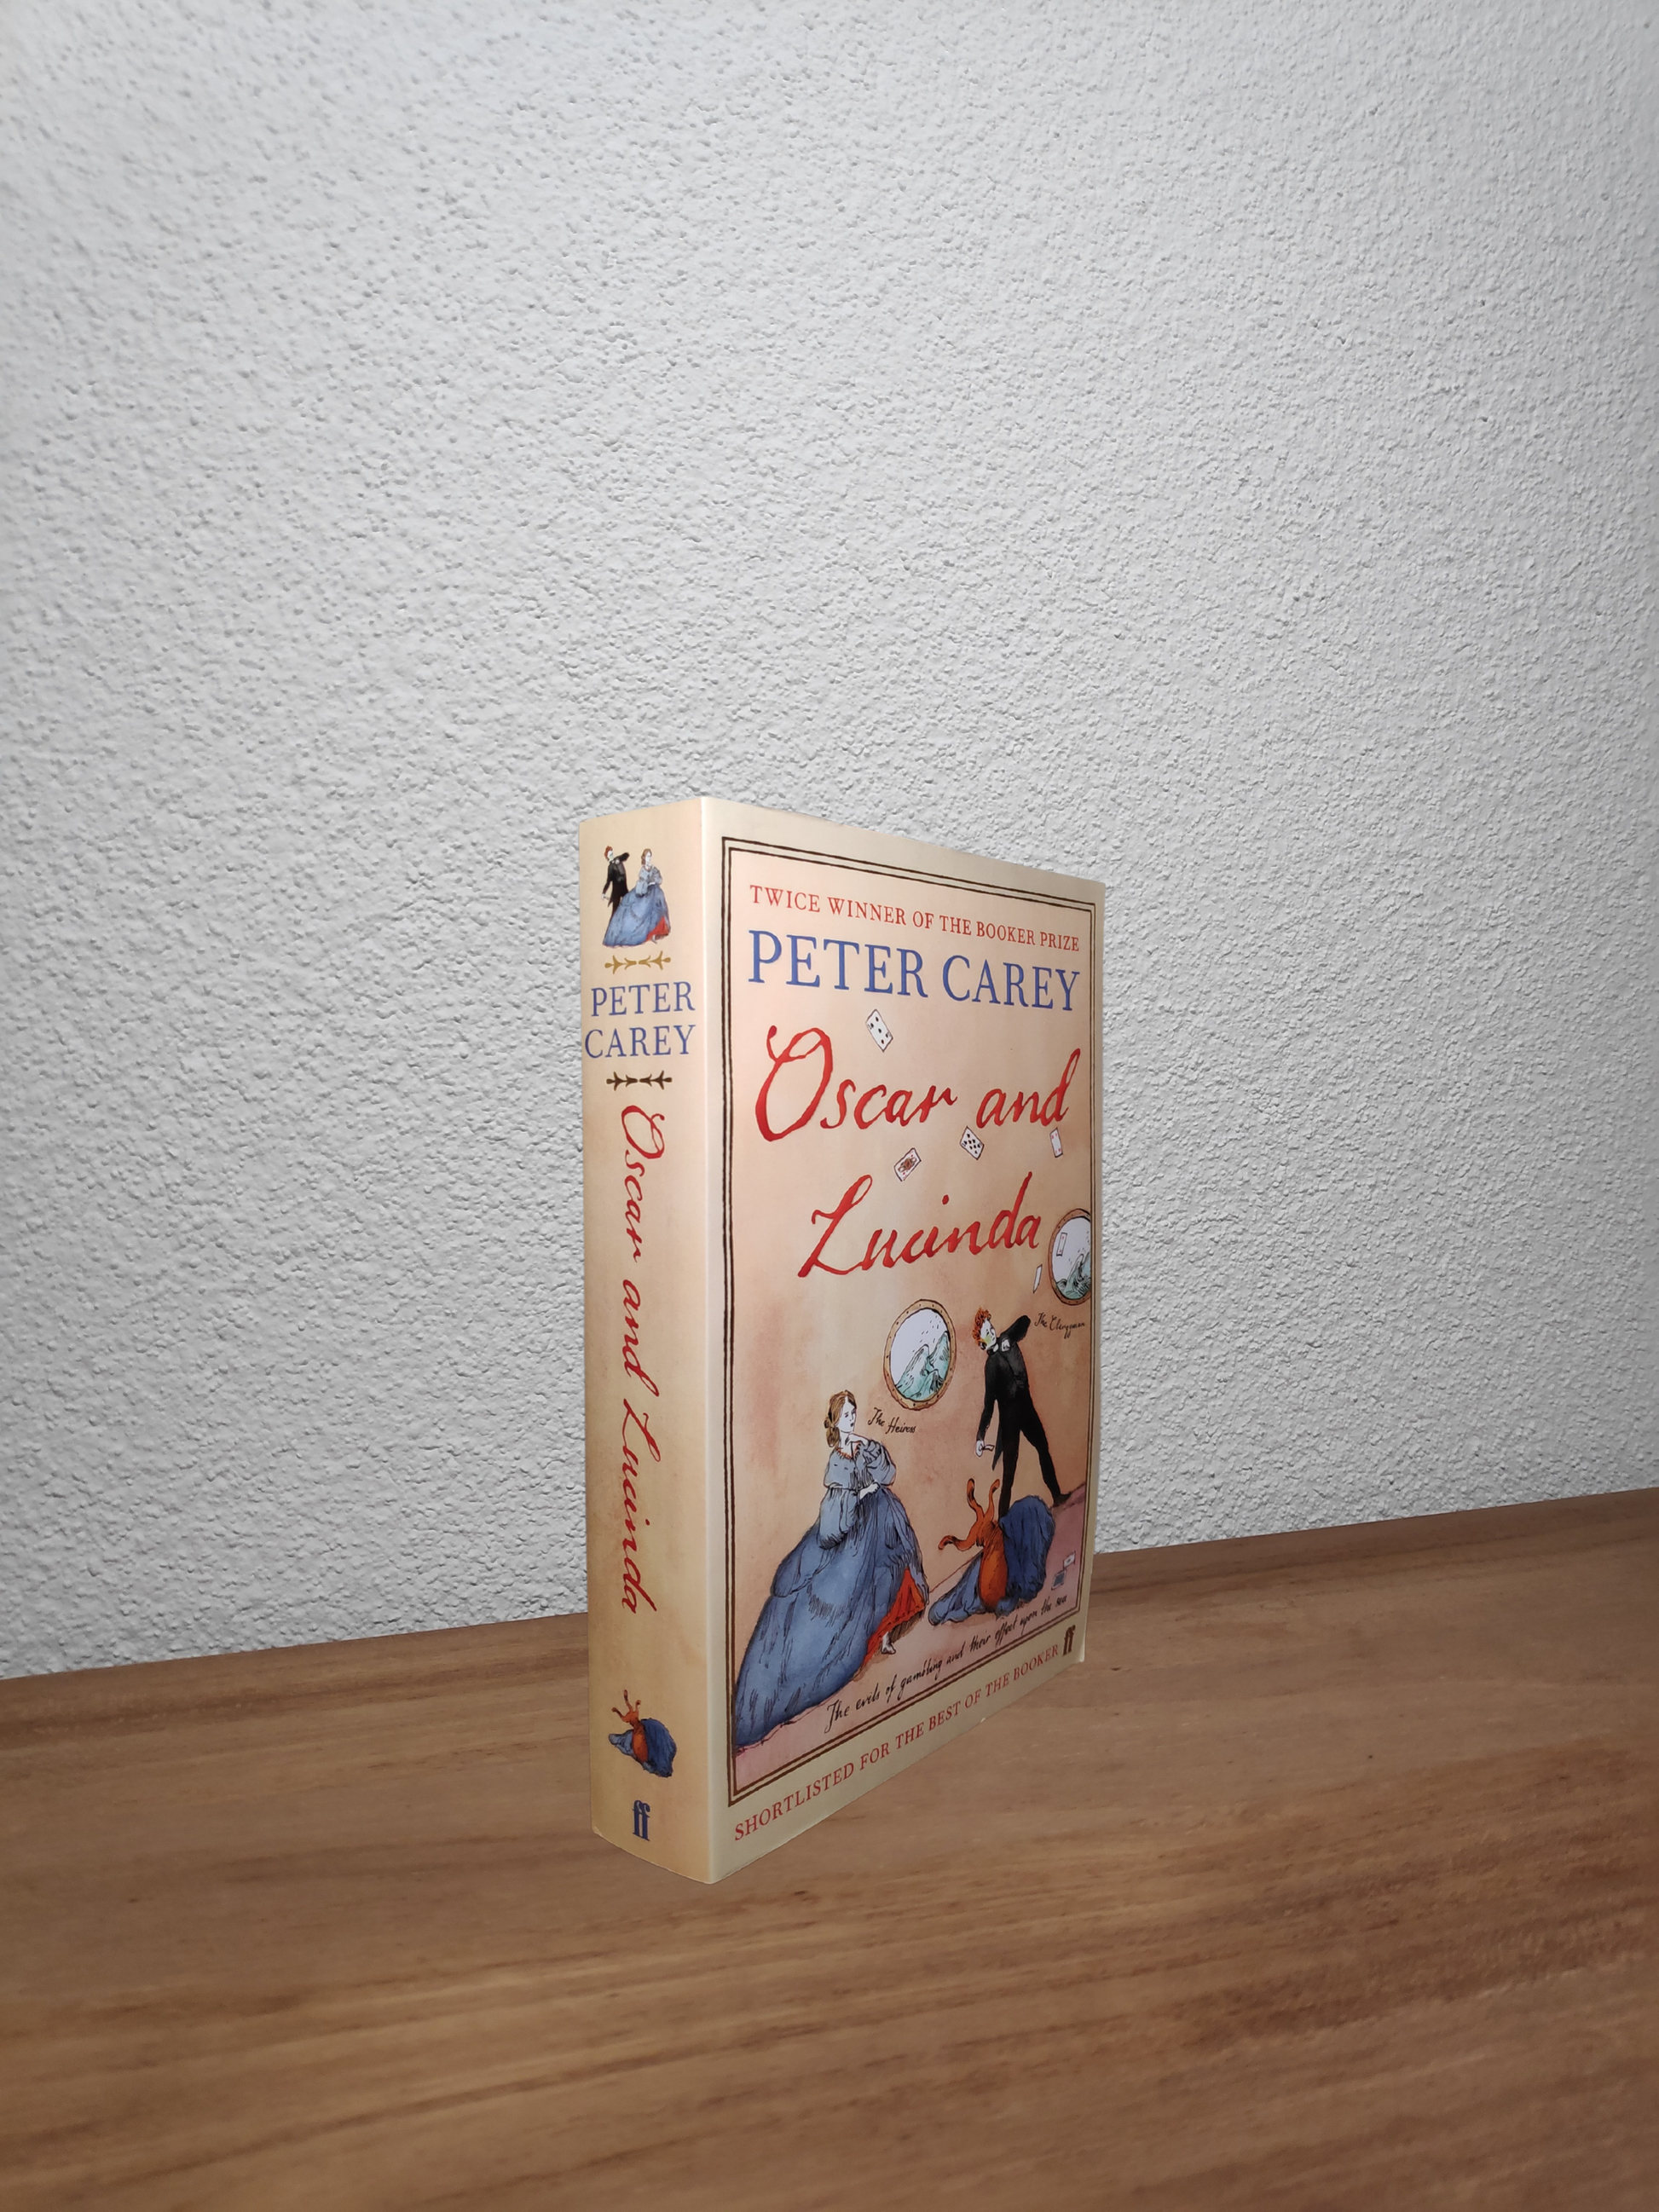 Peter Carey - Oscar and Lucinda  - Second-hand english book to deliver in Zurich & Switzerland